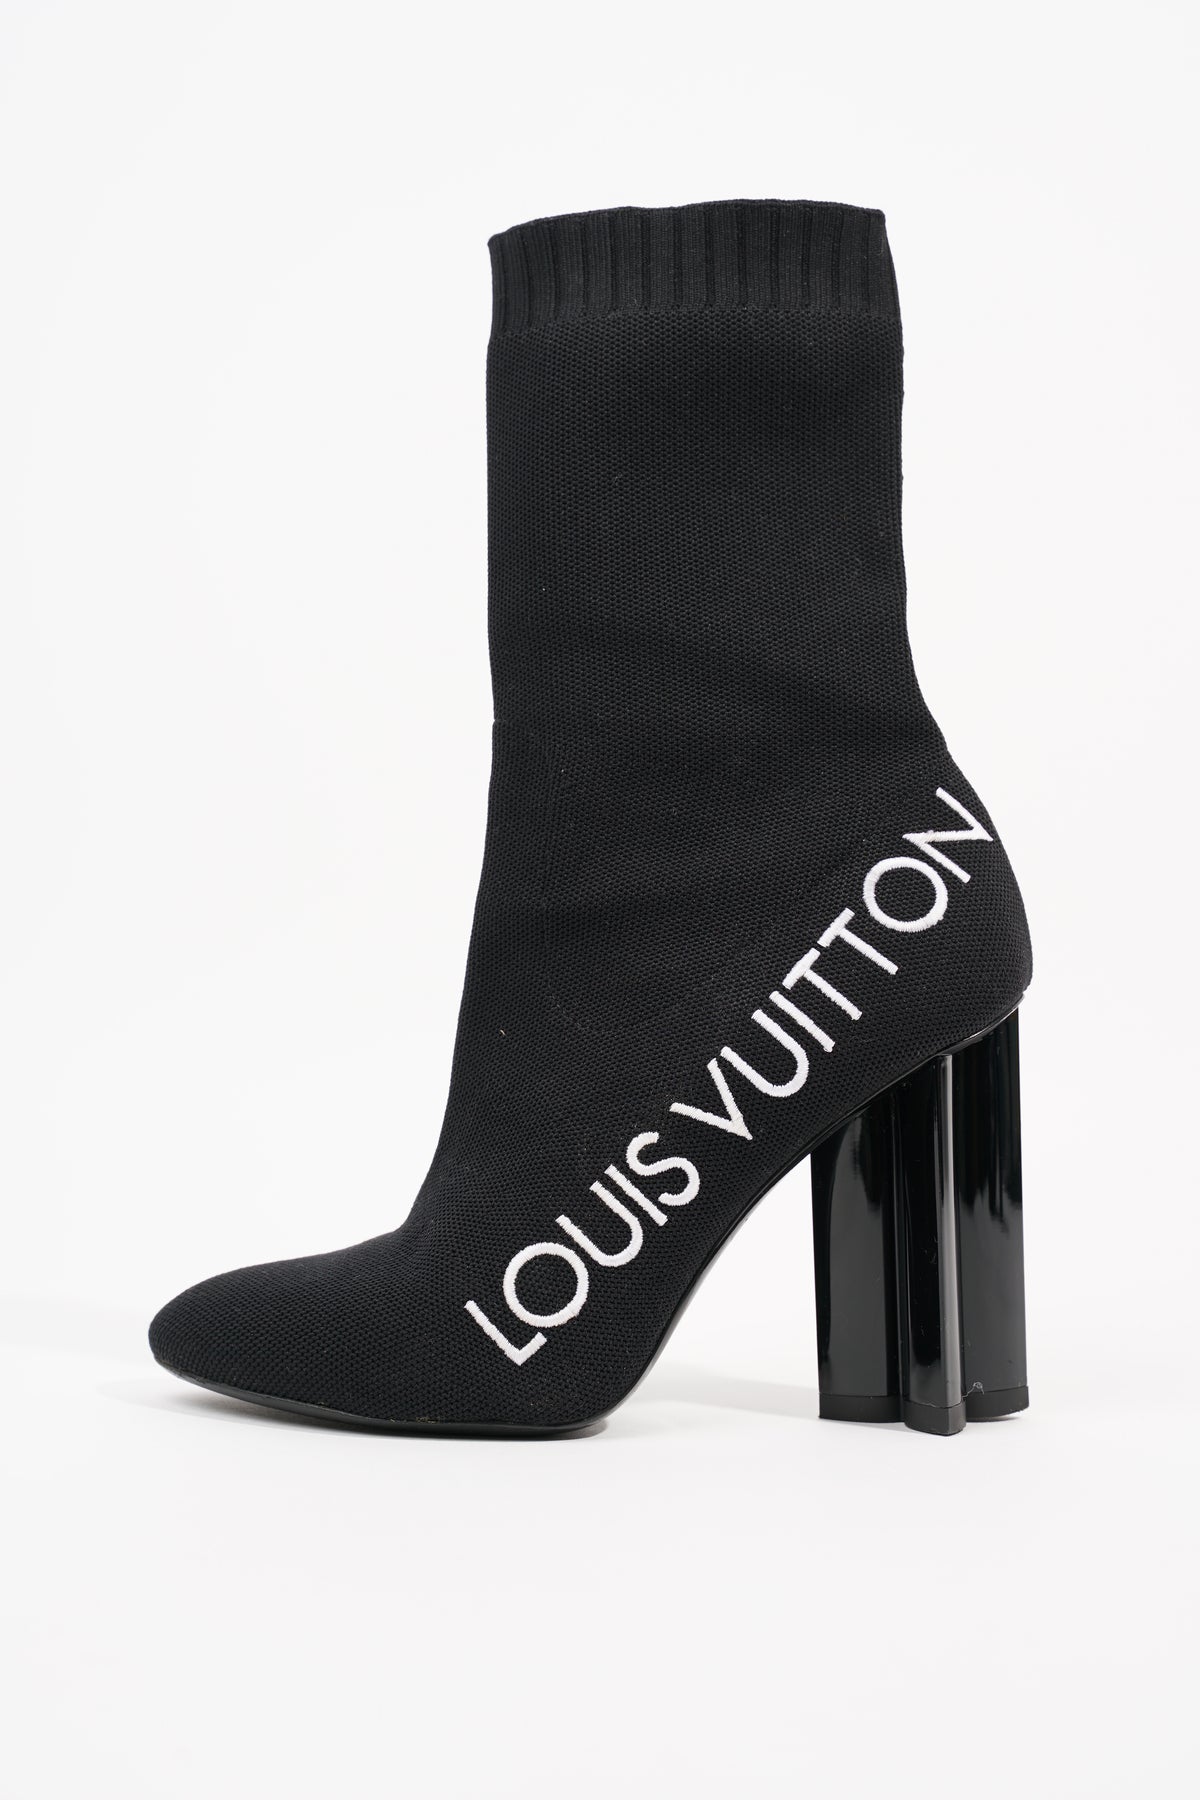 Leather ankle boots Louis Vuitton Black size 37 EU in Leather - 21855624